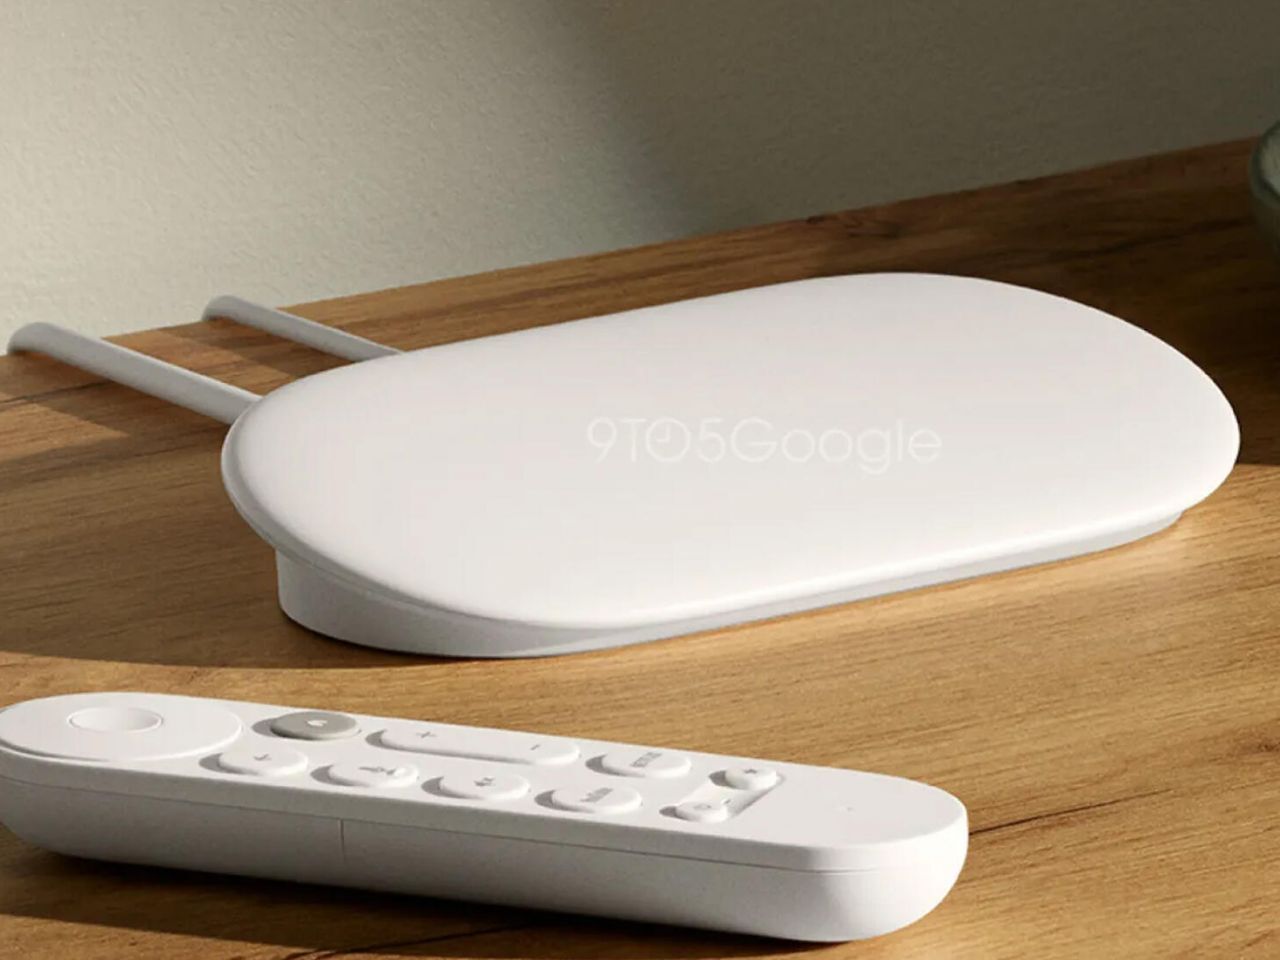 Google may be developing a new device called “Google TV Streamer” to replace “Chromecast”